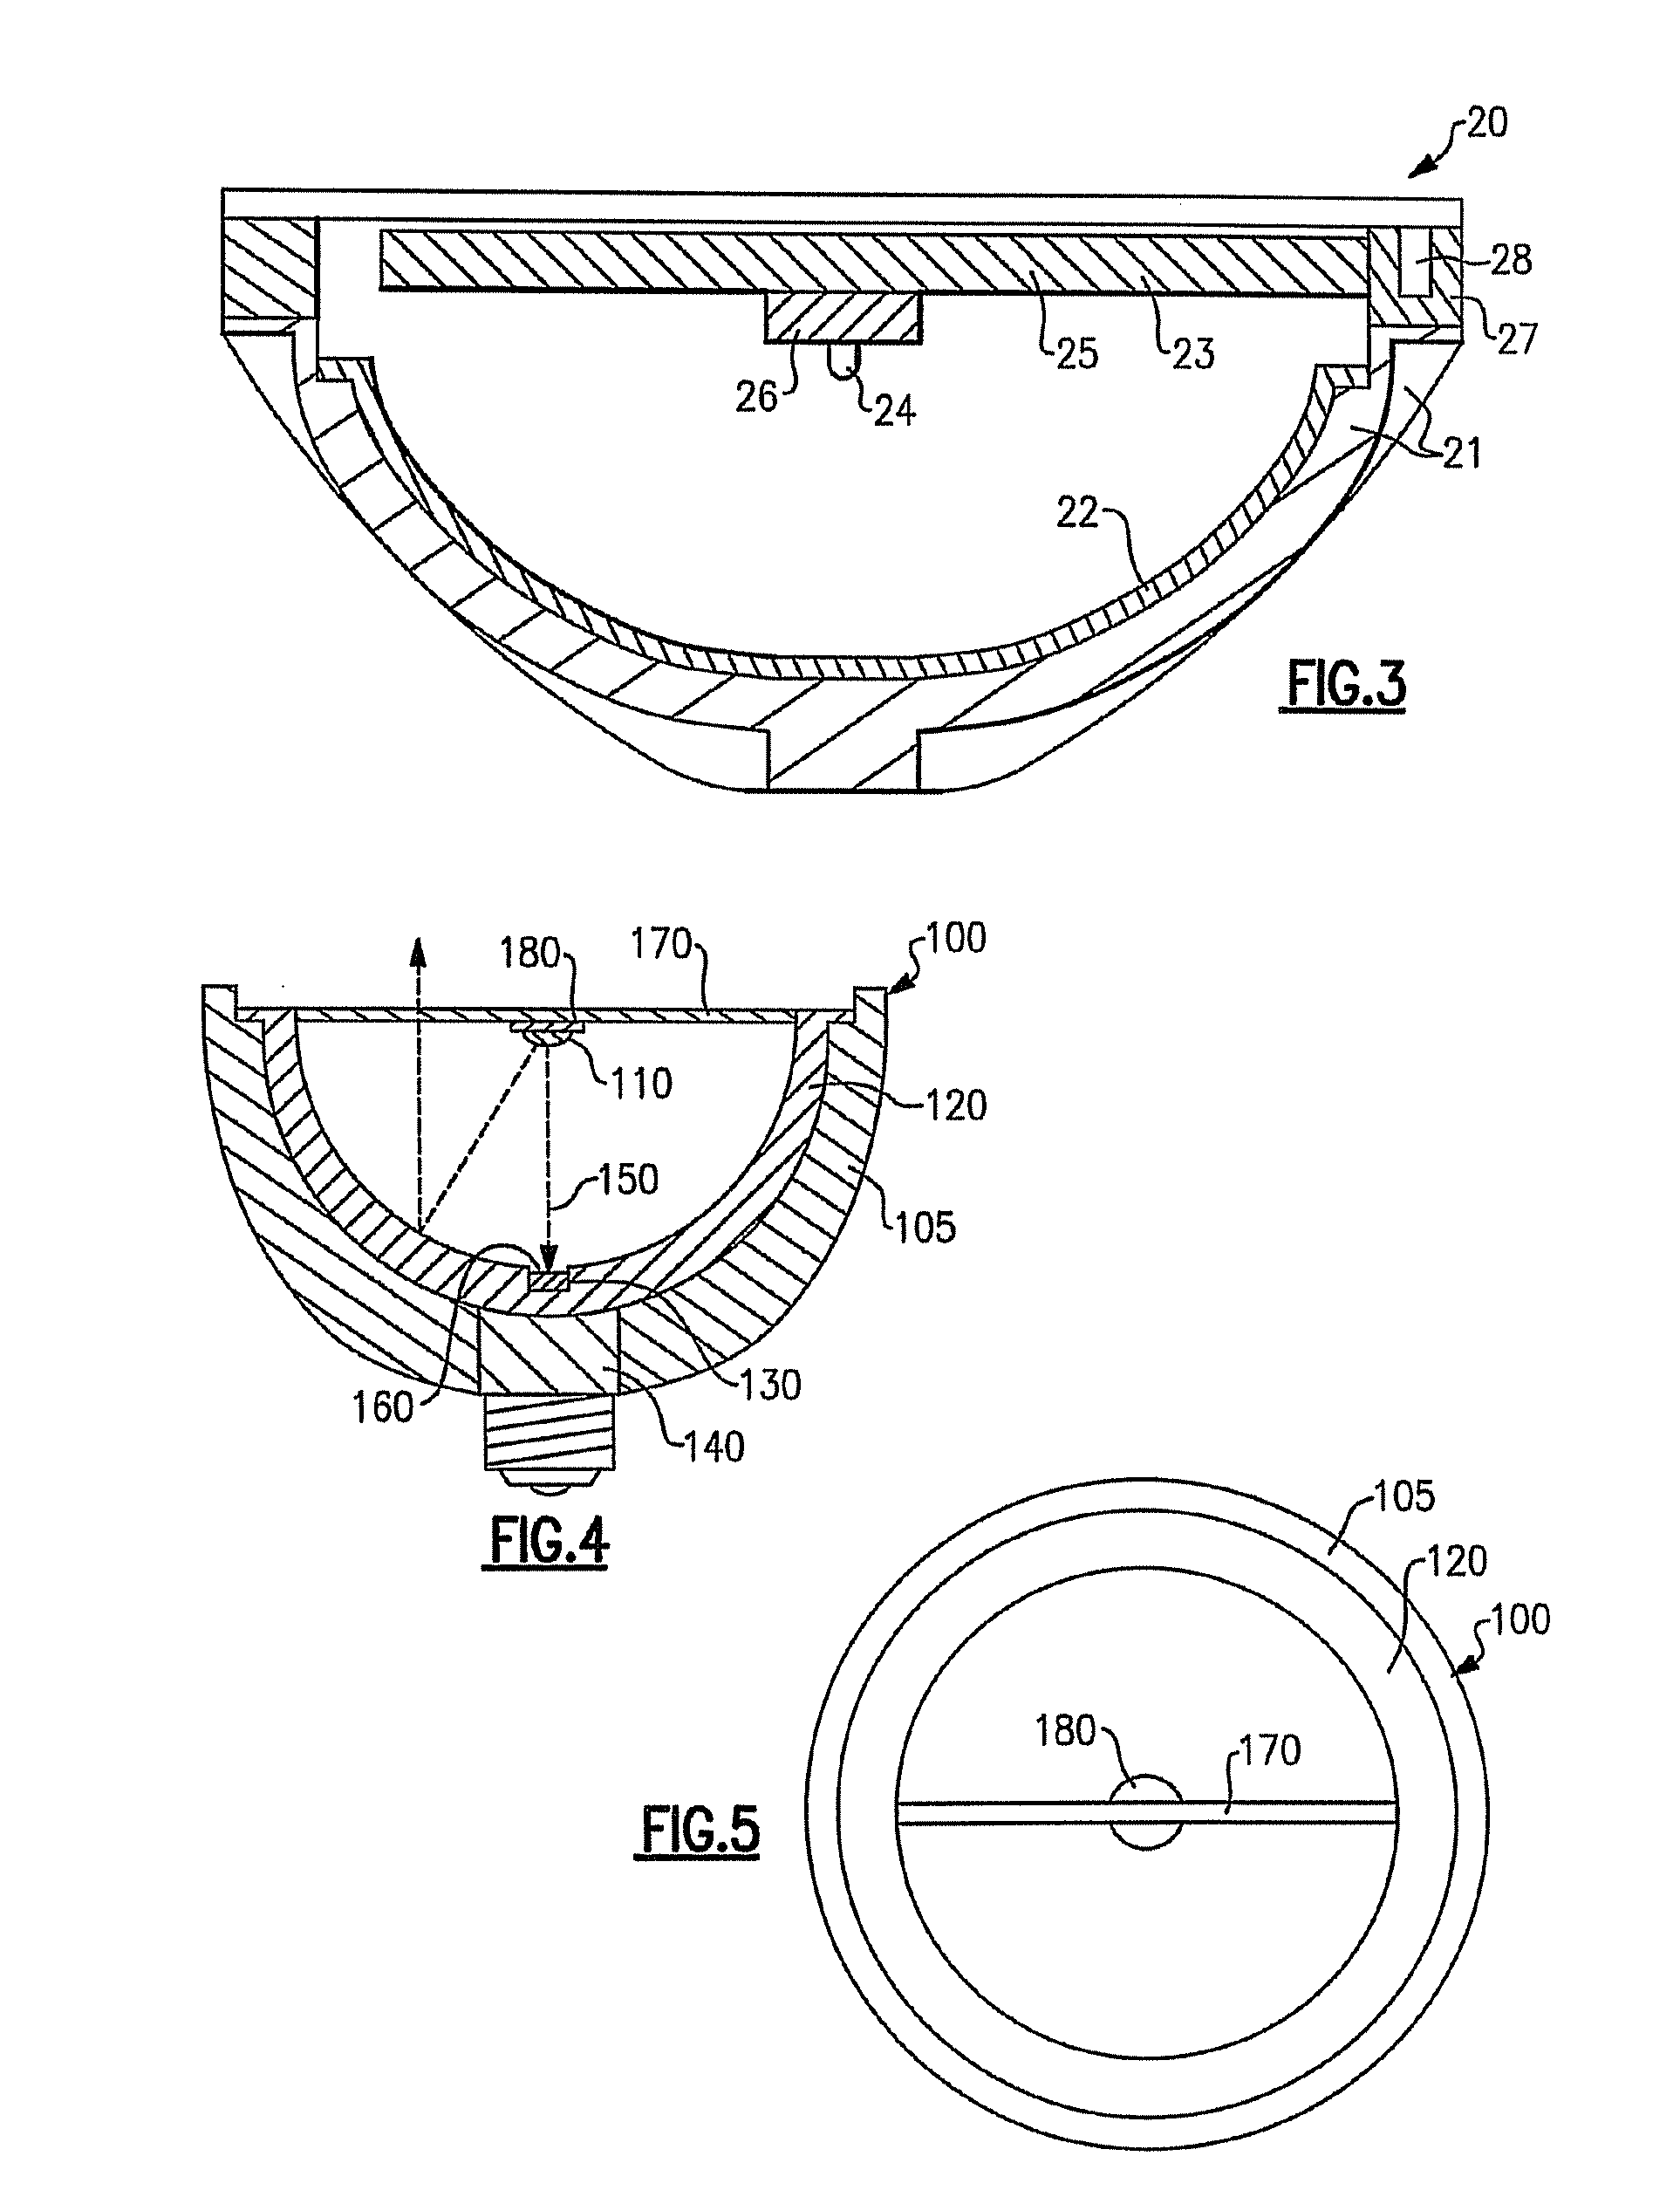 Lighting device, heat transfer structure and heat transfer element